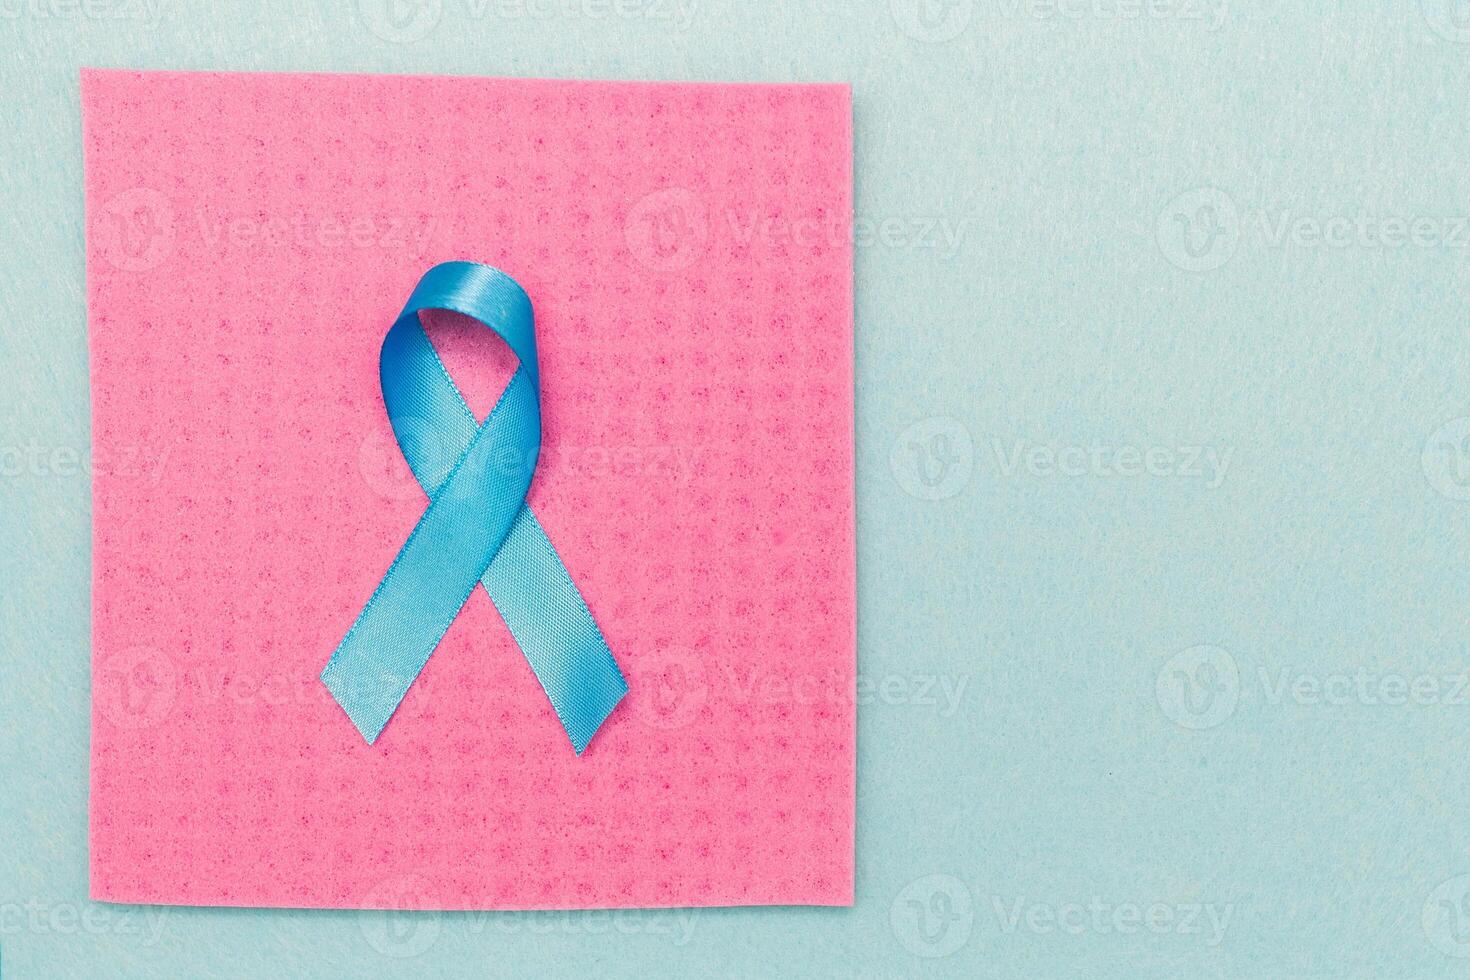 A blue ribbon in support of World Cancer Day, raising the awareness of people living with a prostate tumor. photo